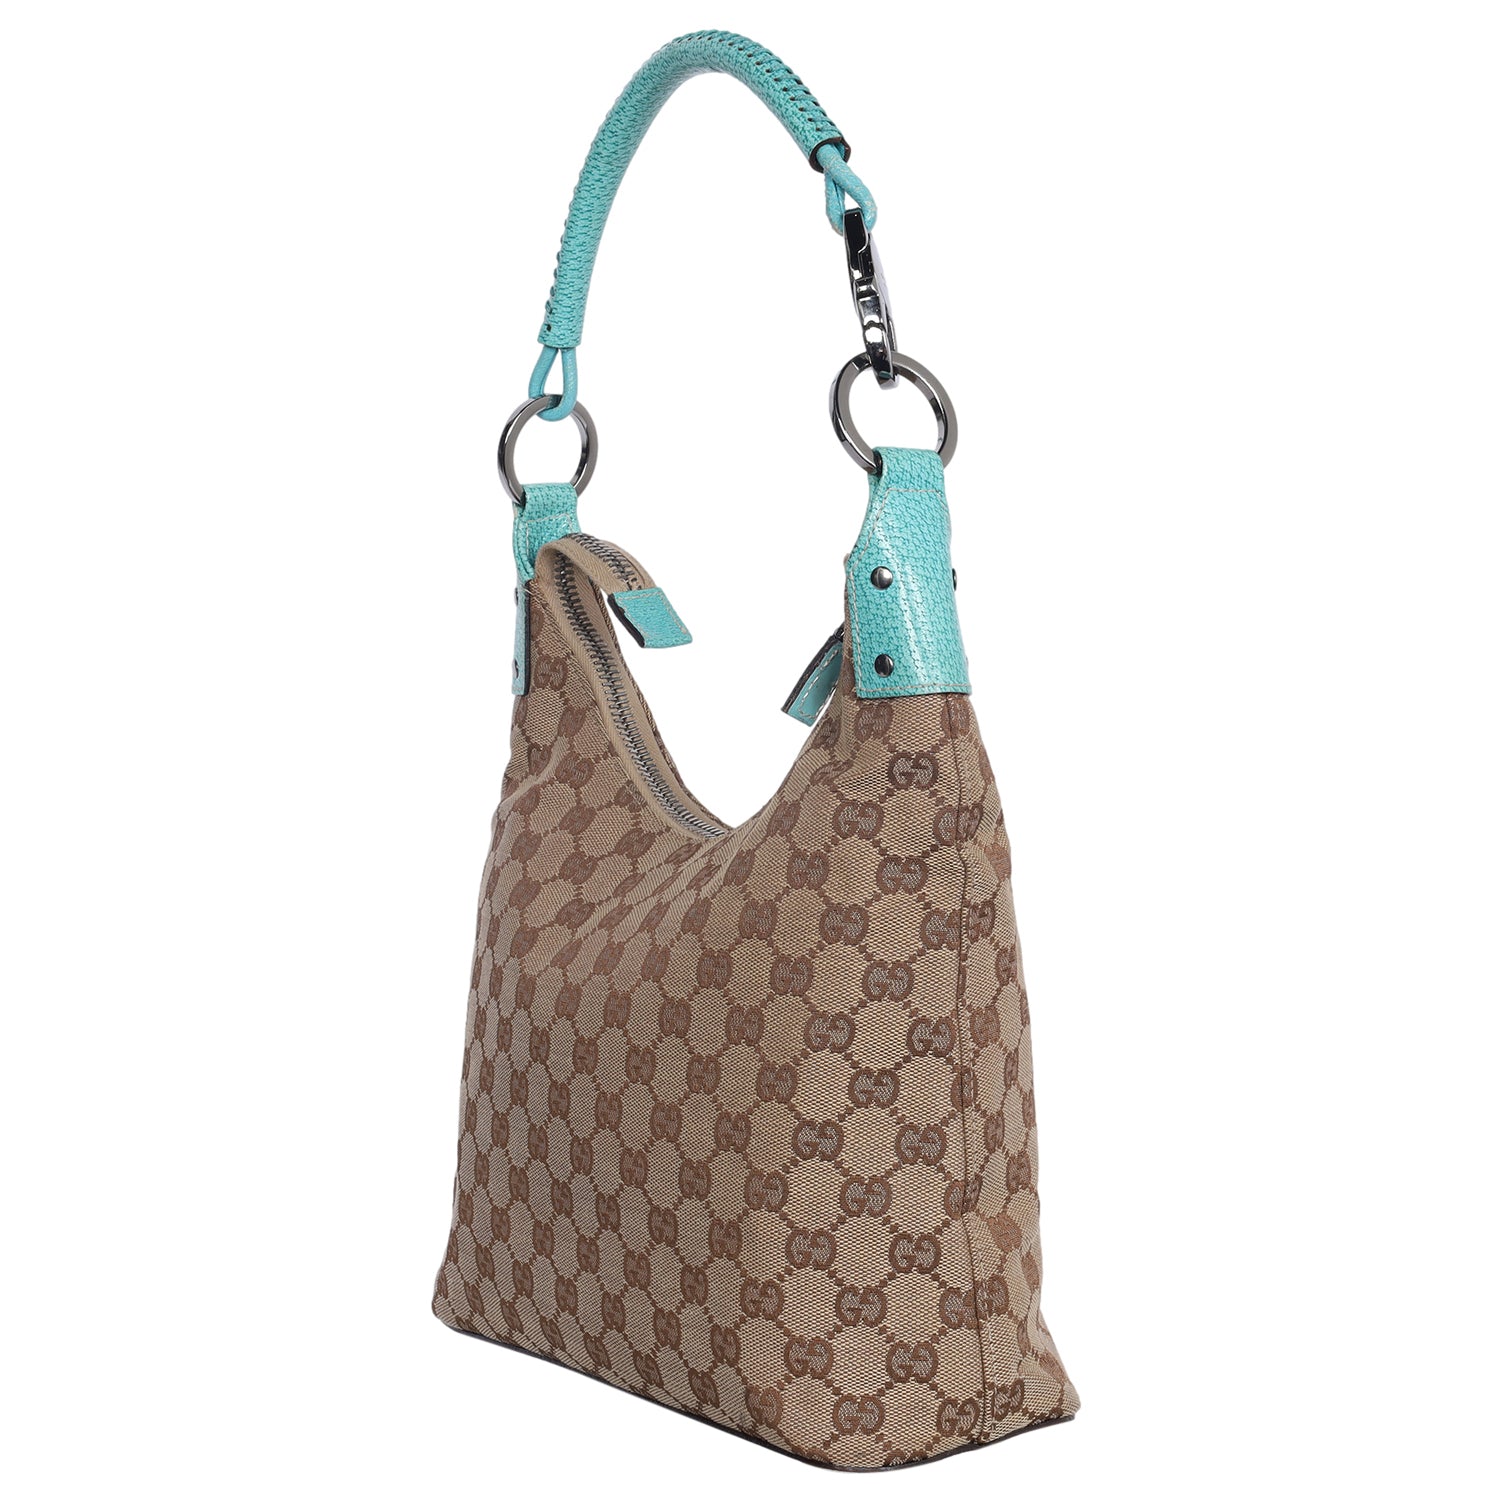 Gucci Hobo Handbags & Bags Leather Exterior for Women, Authenticity  Guaranteed